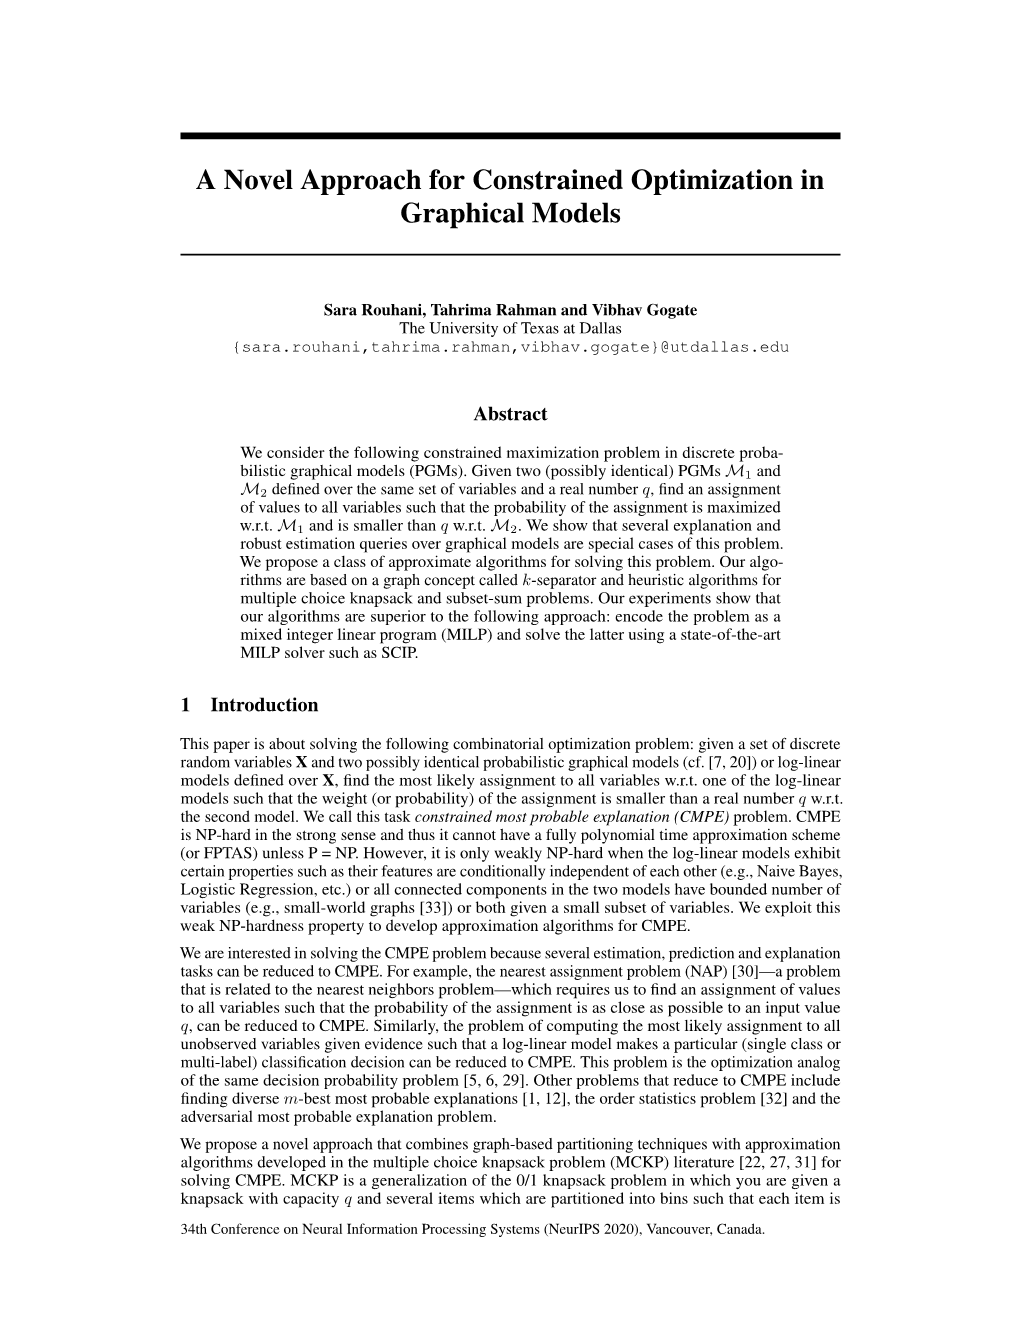 A Novel Approach for Constrained Optimization in Graphical Models